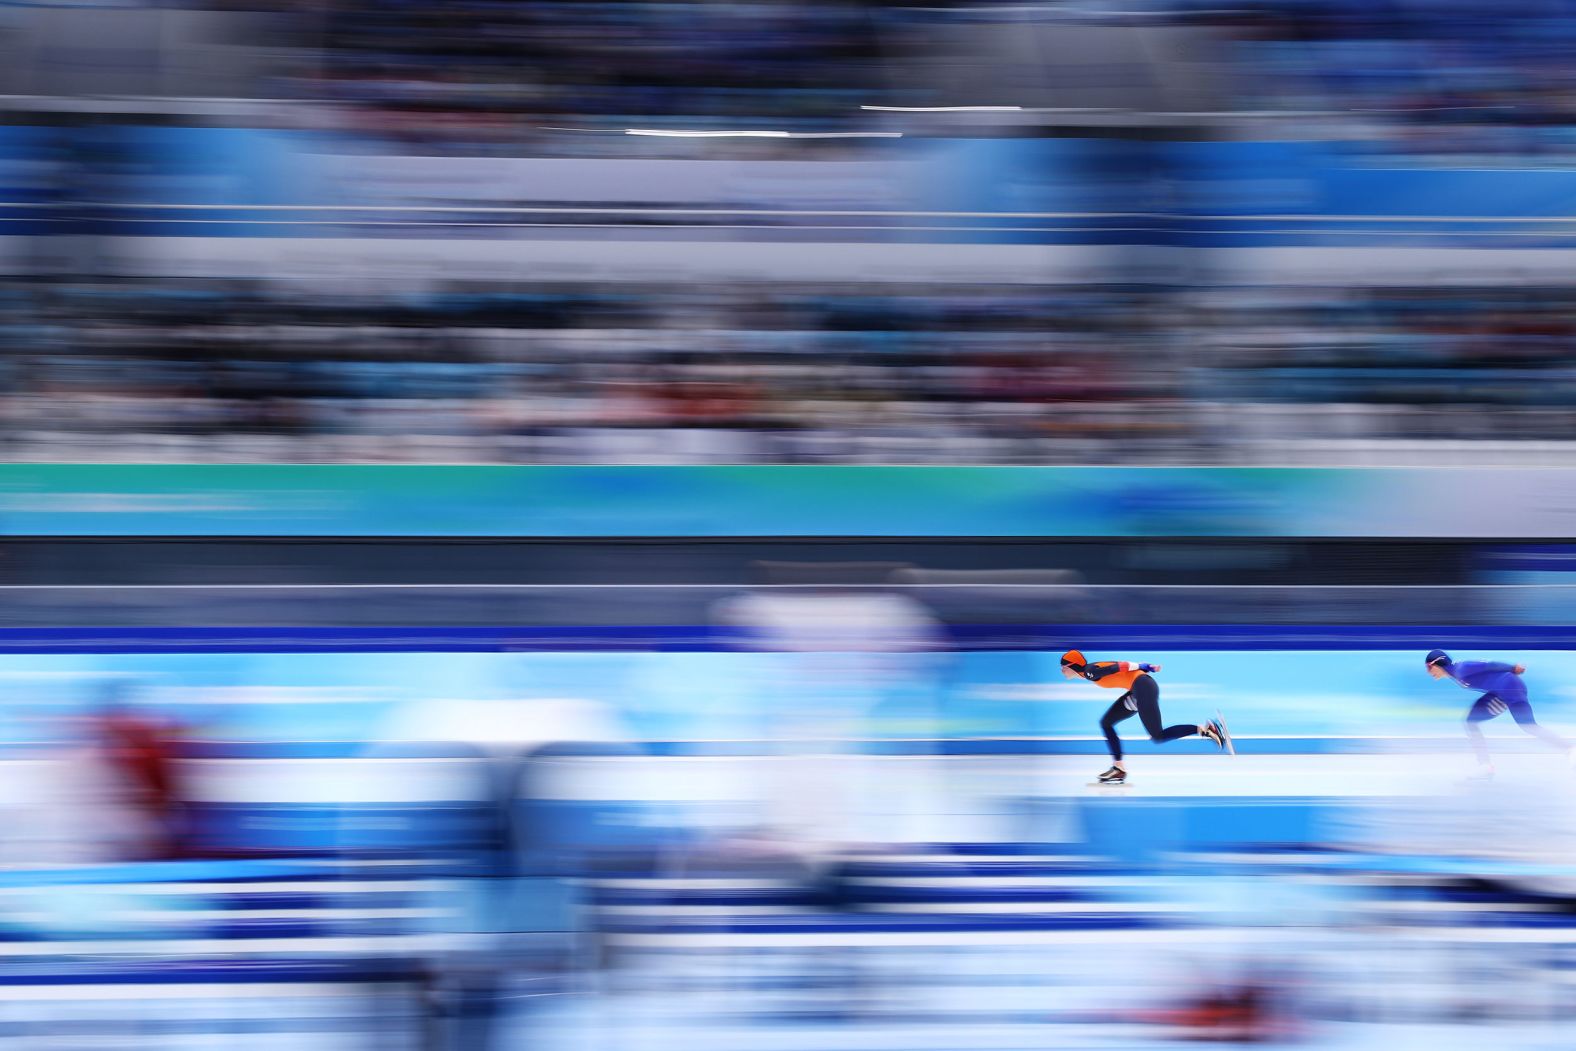 Dutch speedskater Irene Schouten competes in the 5,000 meters on February 10. Schouten won the event in stunning fashion,<a href="index.php?page=&url=https%3A%2F%2Fwww.cnn.com%2Fworld%2Flive-news%2Fbeijing-winter-olympics-02-10-22-spt%2Fh_7fb53d4b92c785f1b7a9d4f3a8735542" target="_blank"> breaking a 20-year-old Olympic record</a> set by Germany's Claudia Pechstein at the Salt Lake City Games in 2002.